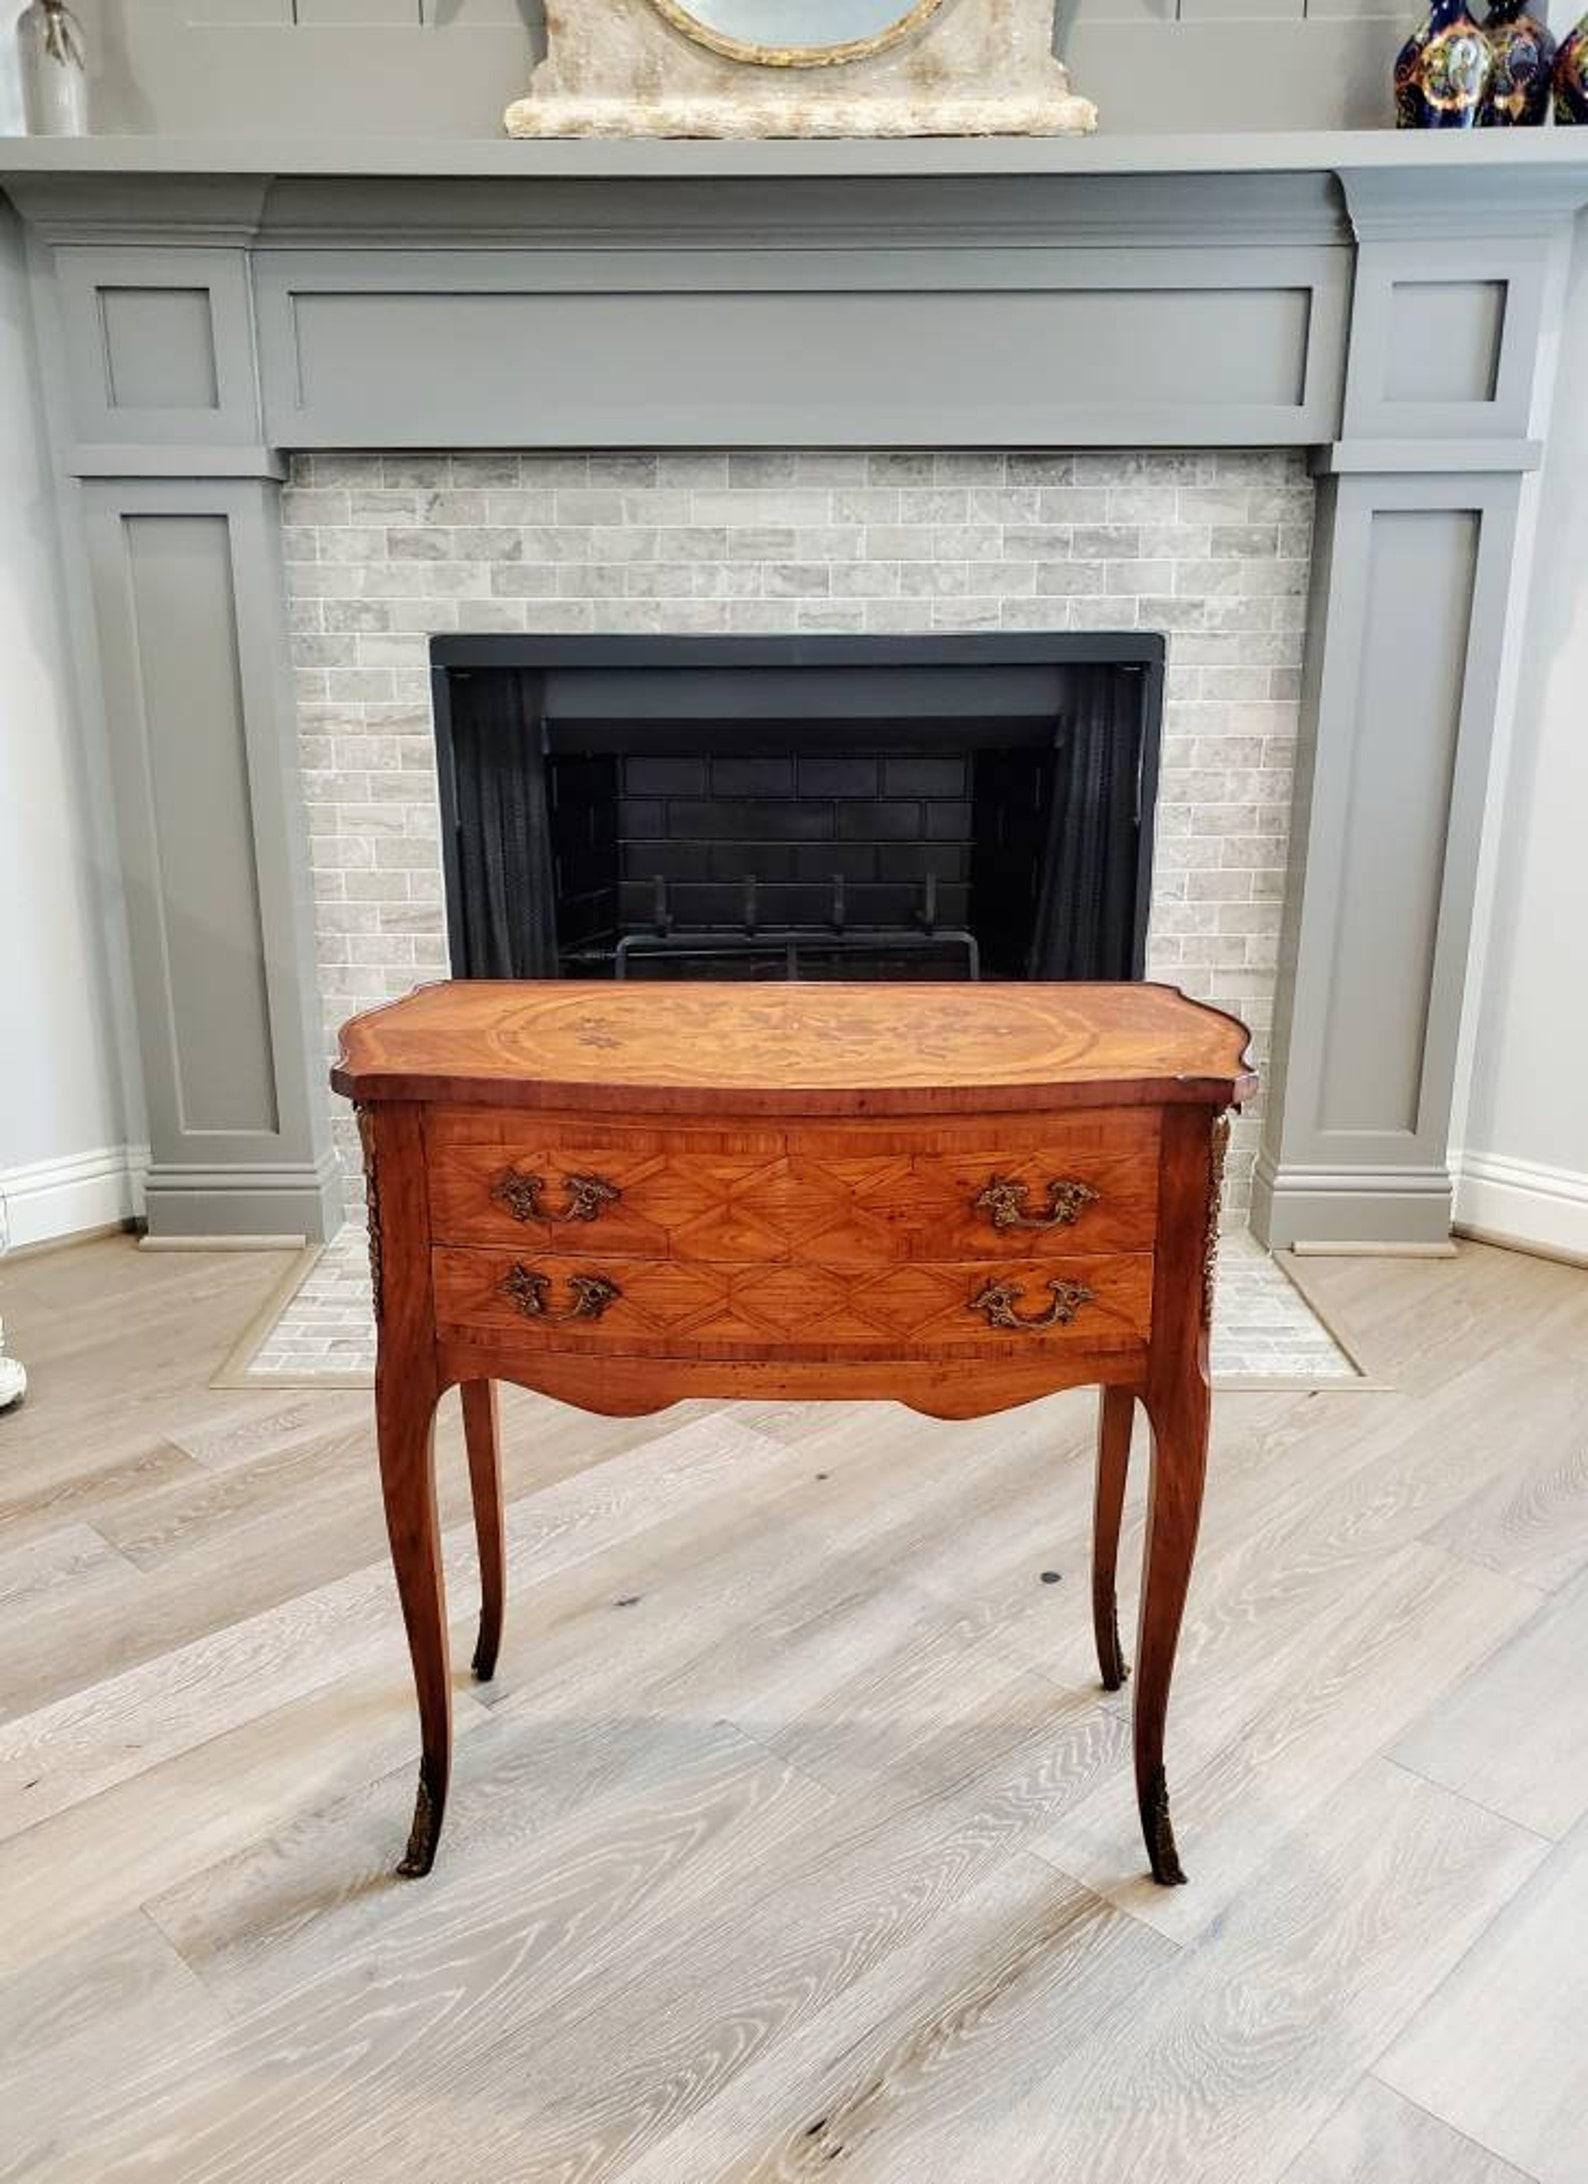 An exquisite French chest of three drawers side table from the early 20th century. The uniquely designed antique finished in elegant Louis XV taste, having a shaped rectangular top featuring beautiful exotic wood inlays of floral marquetry and